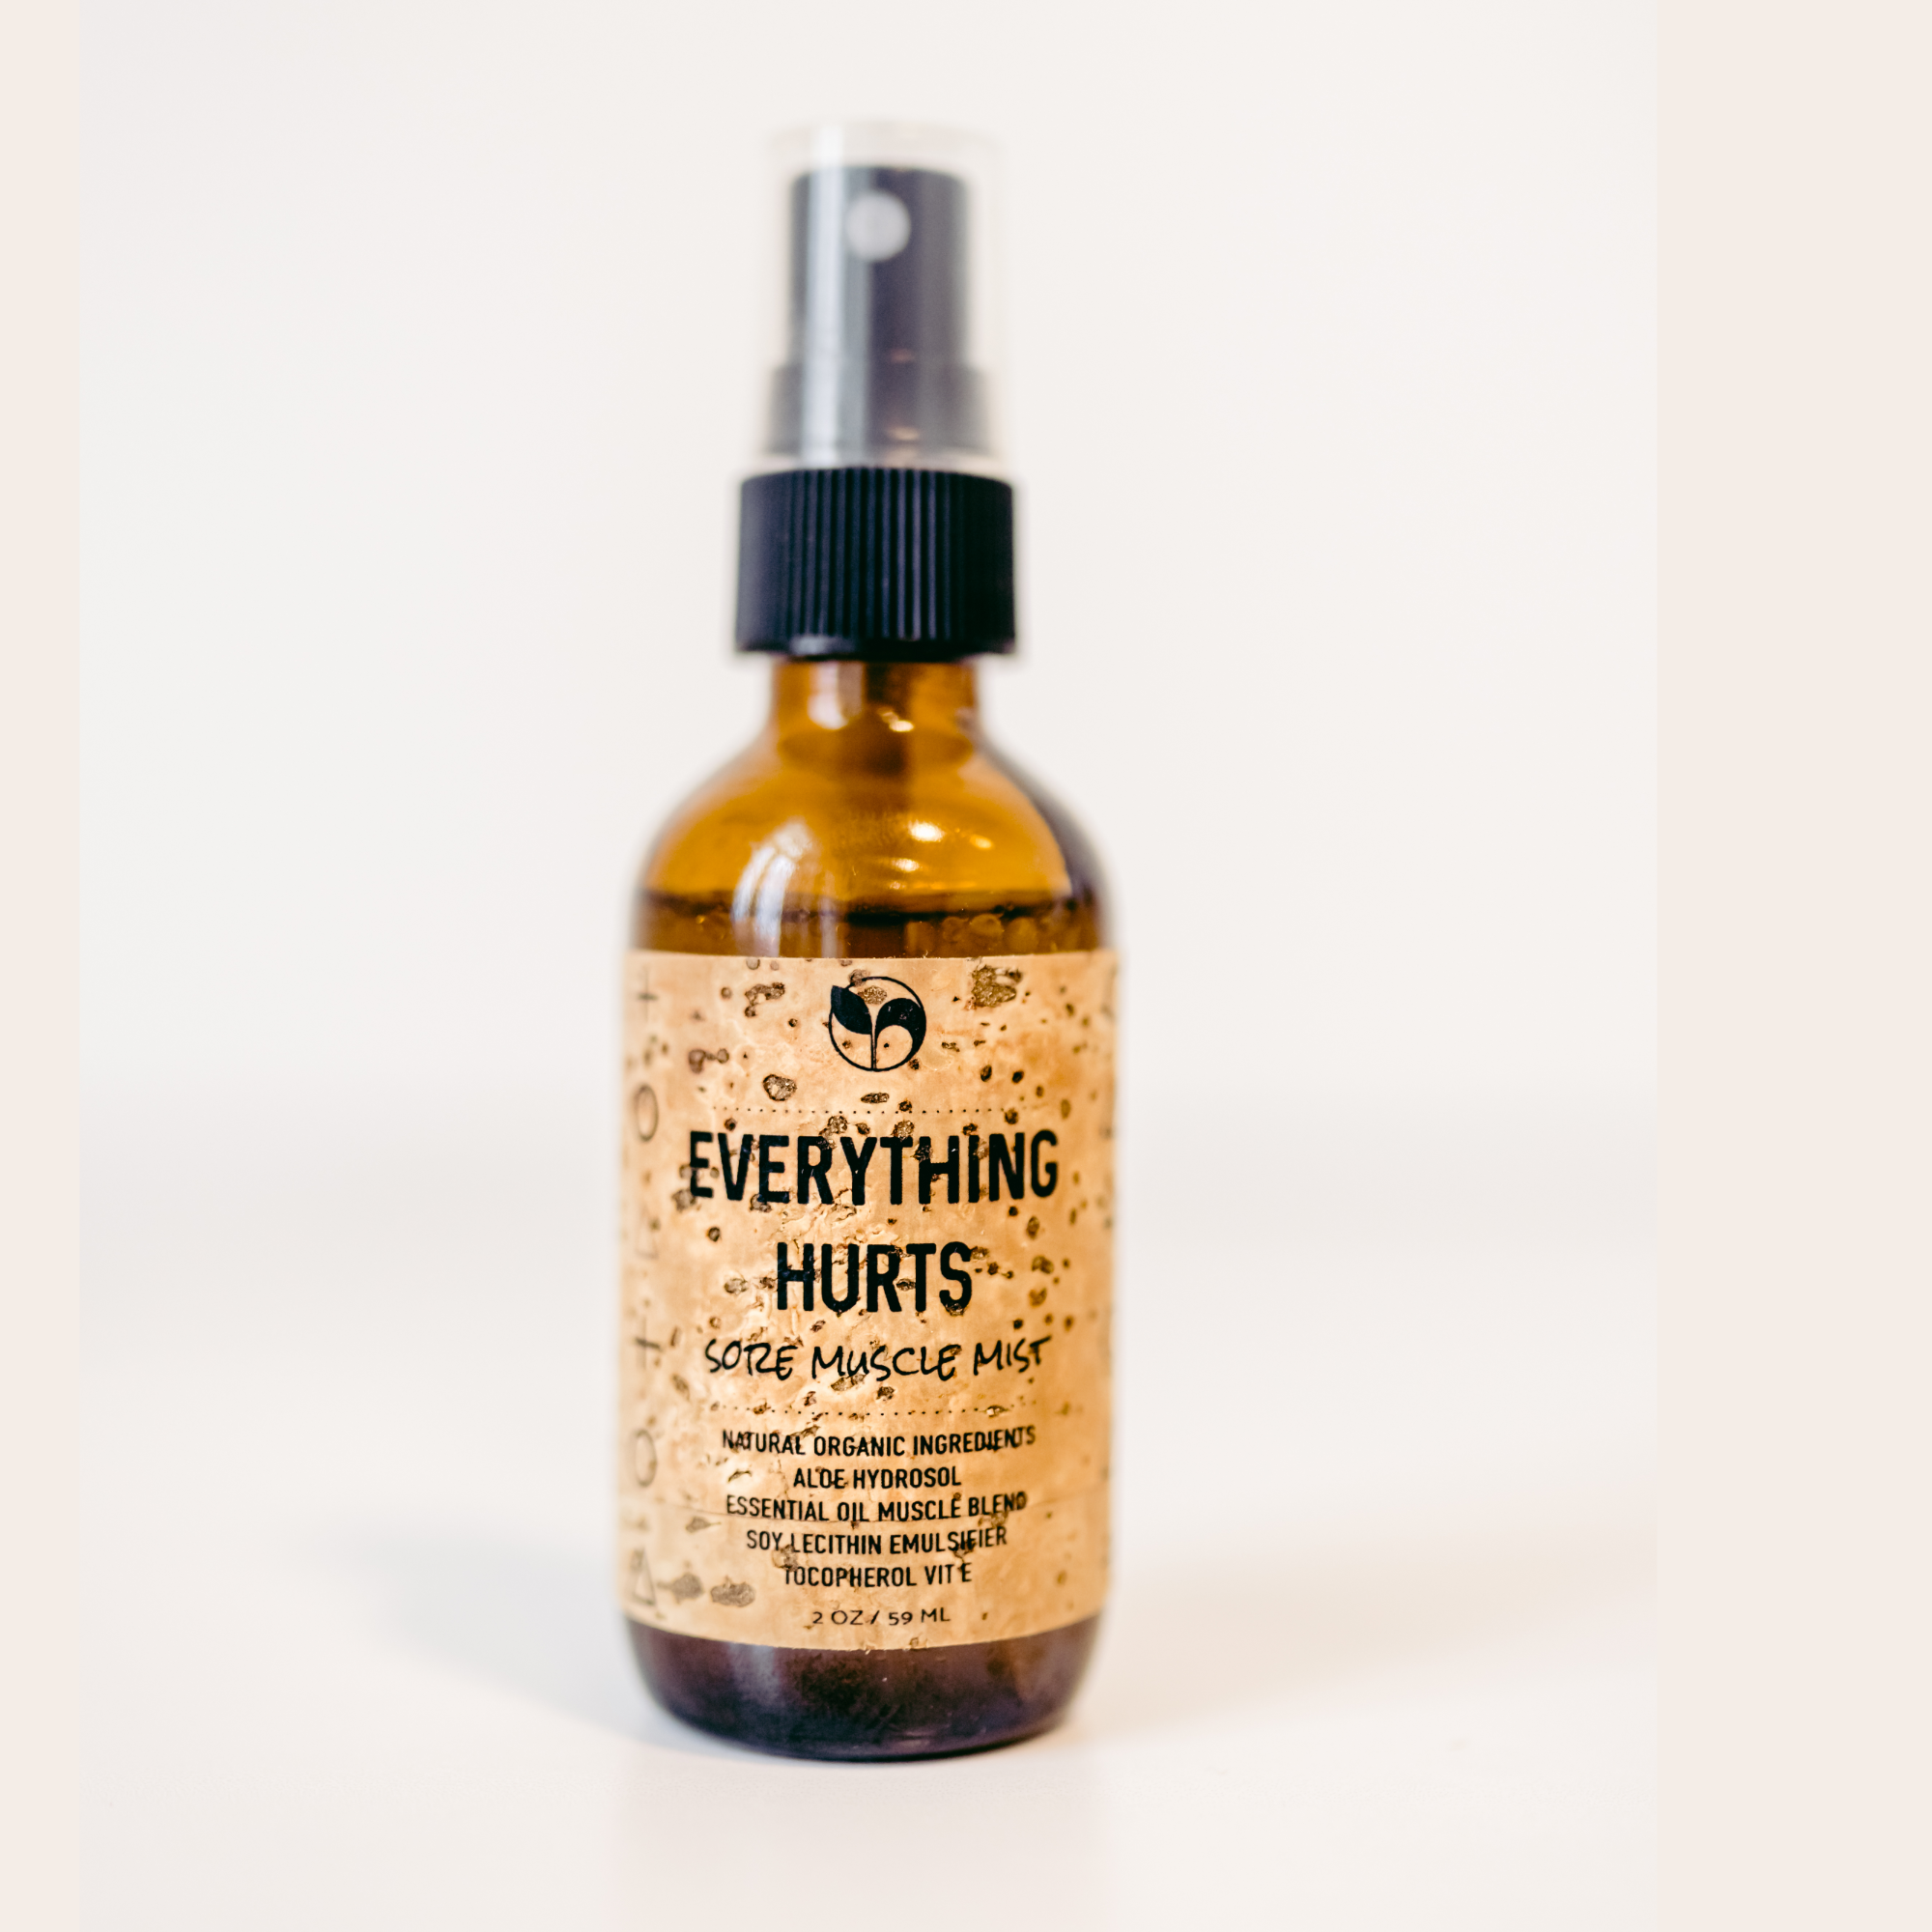 Scentcerae EVERYTHING HURTS Sore Muscle 2 oz amber glass spray